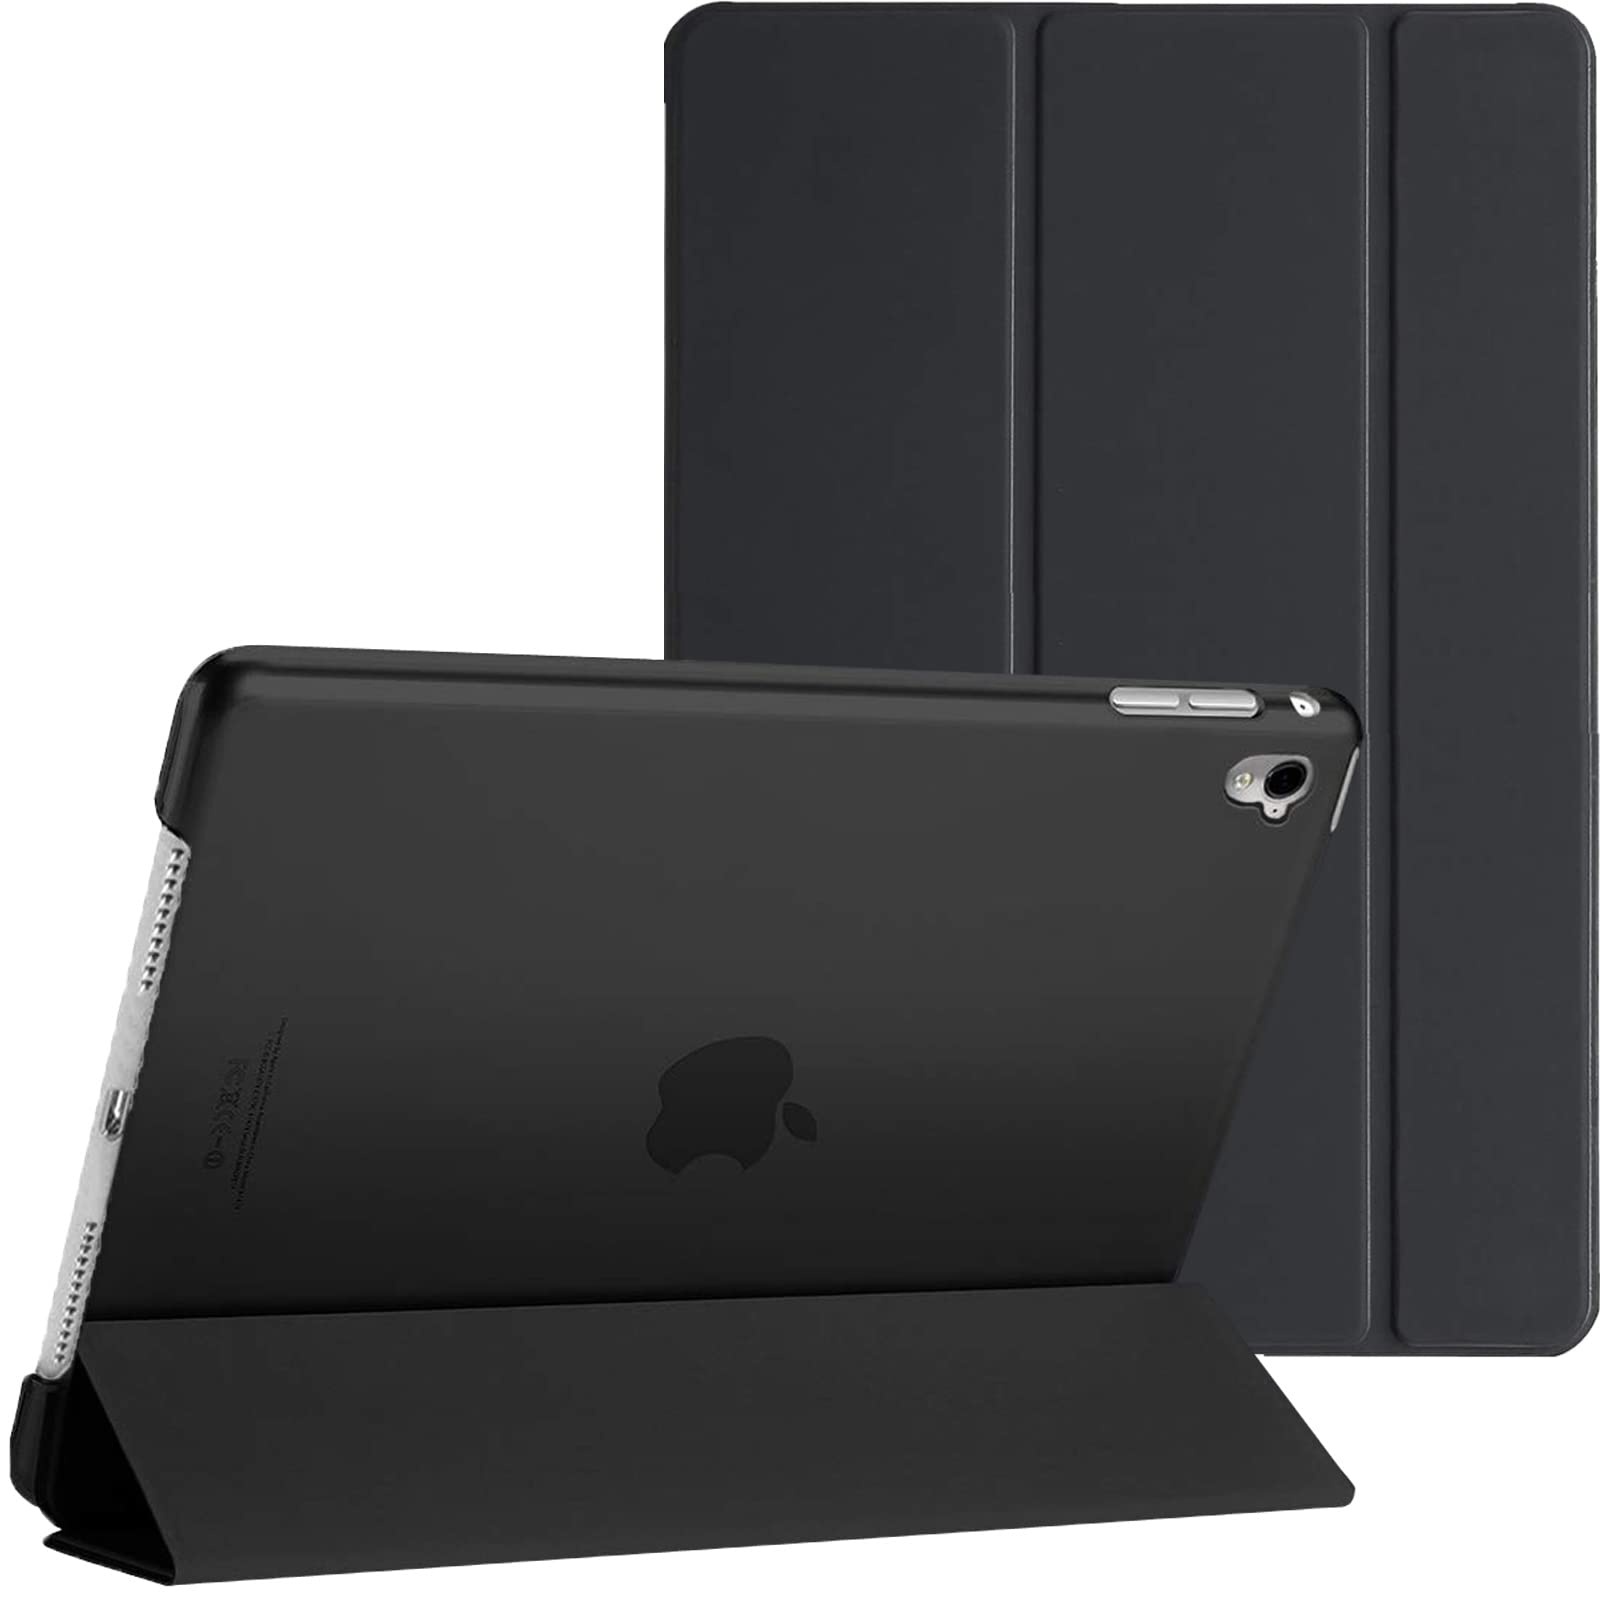 Smart Magnetic Stand Cover For Apple iPad 9./8./7th Generation 10.2'' Case iPad Released in 2019/20/21 with Auto Wake/Sleep (Black)